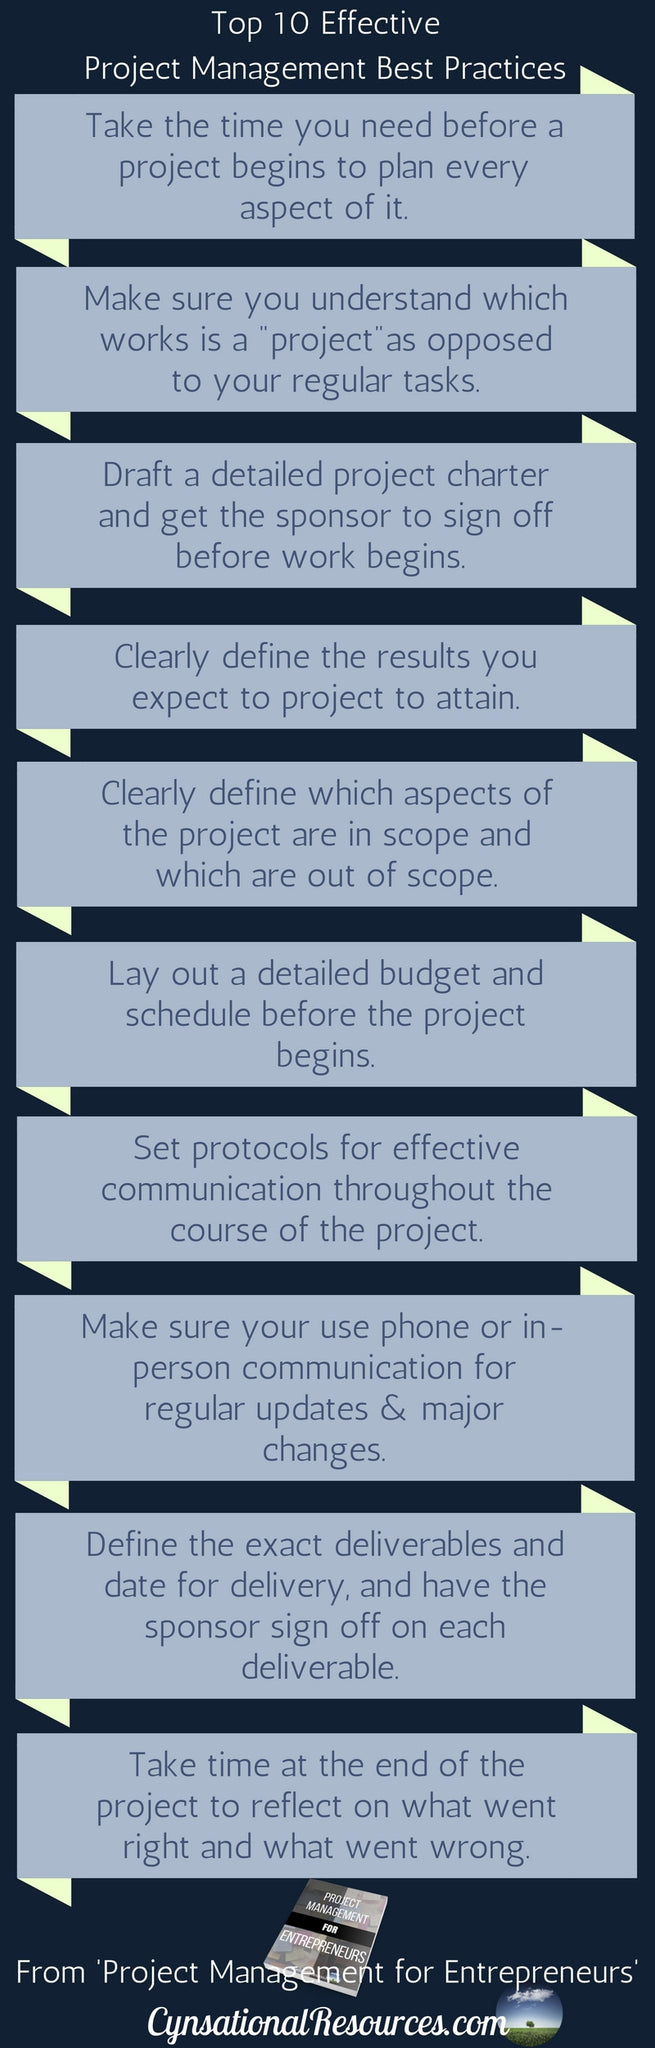 top 10 best practices for project management 